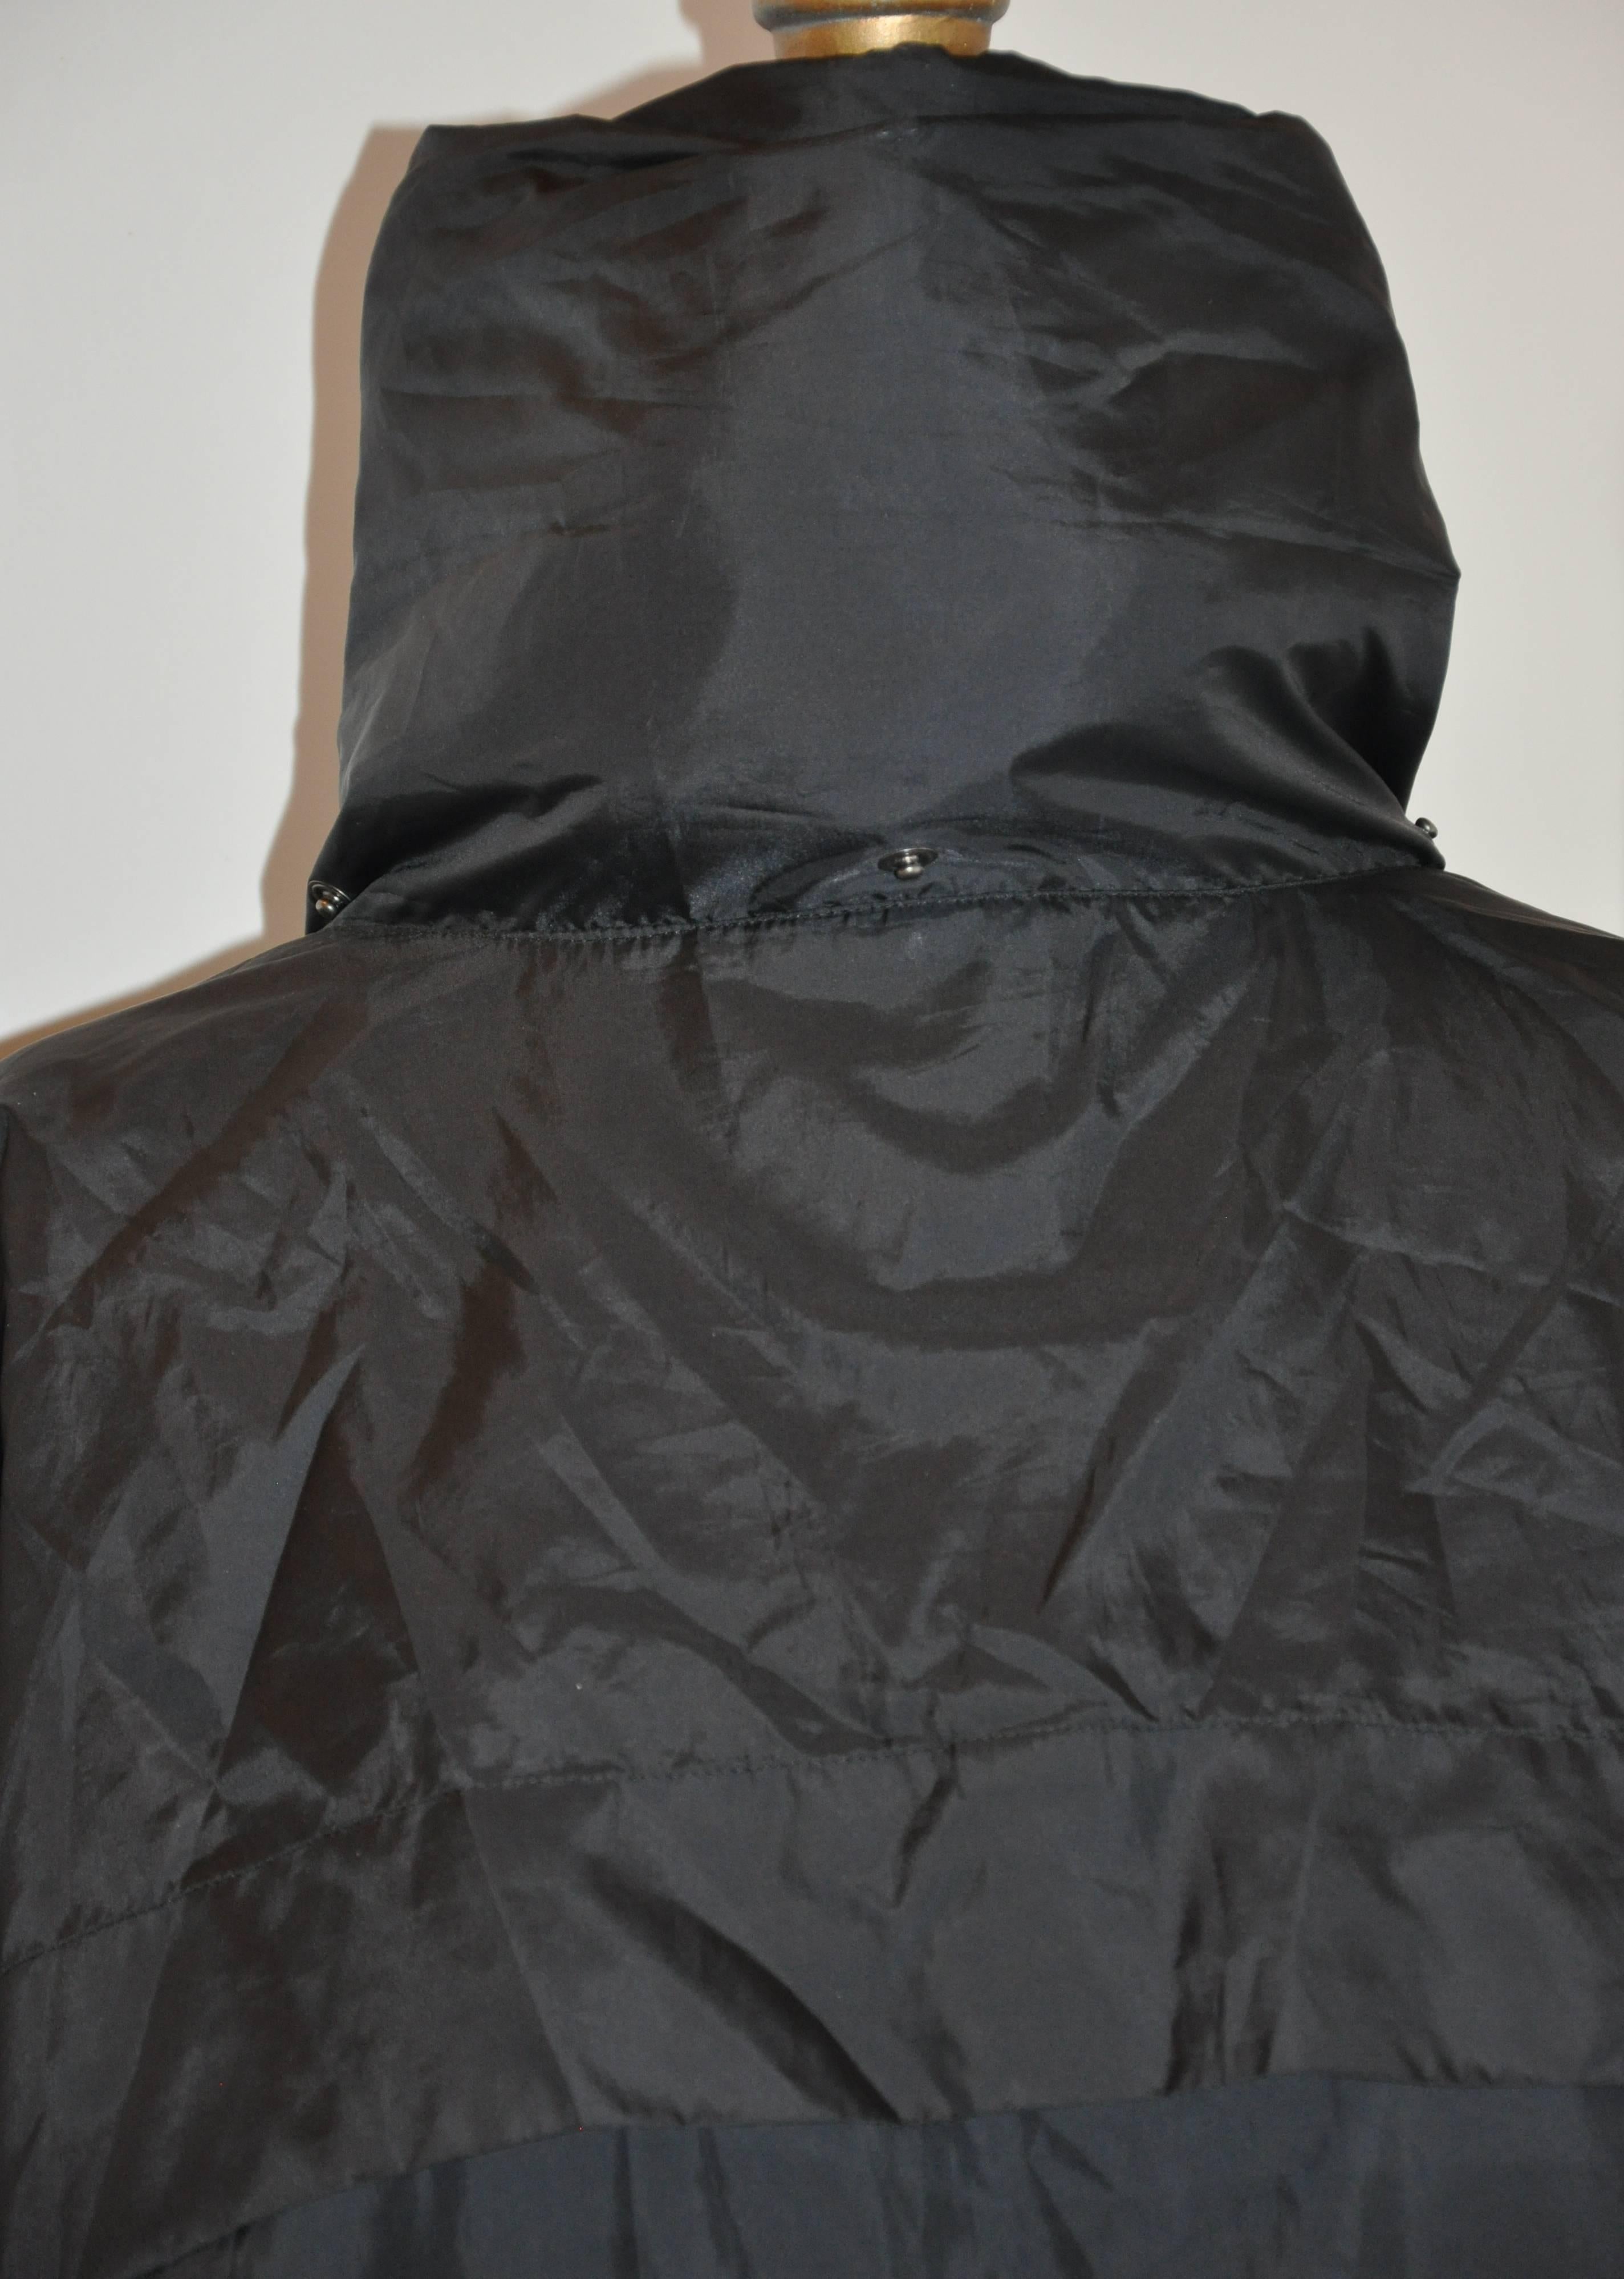 Issey Miyake Men's Black Nylon Optional High-Collar Trench with Hidden Hood In Good Condition For Sale In New York, NY